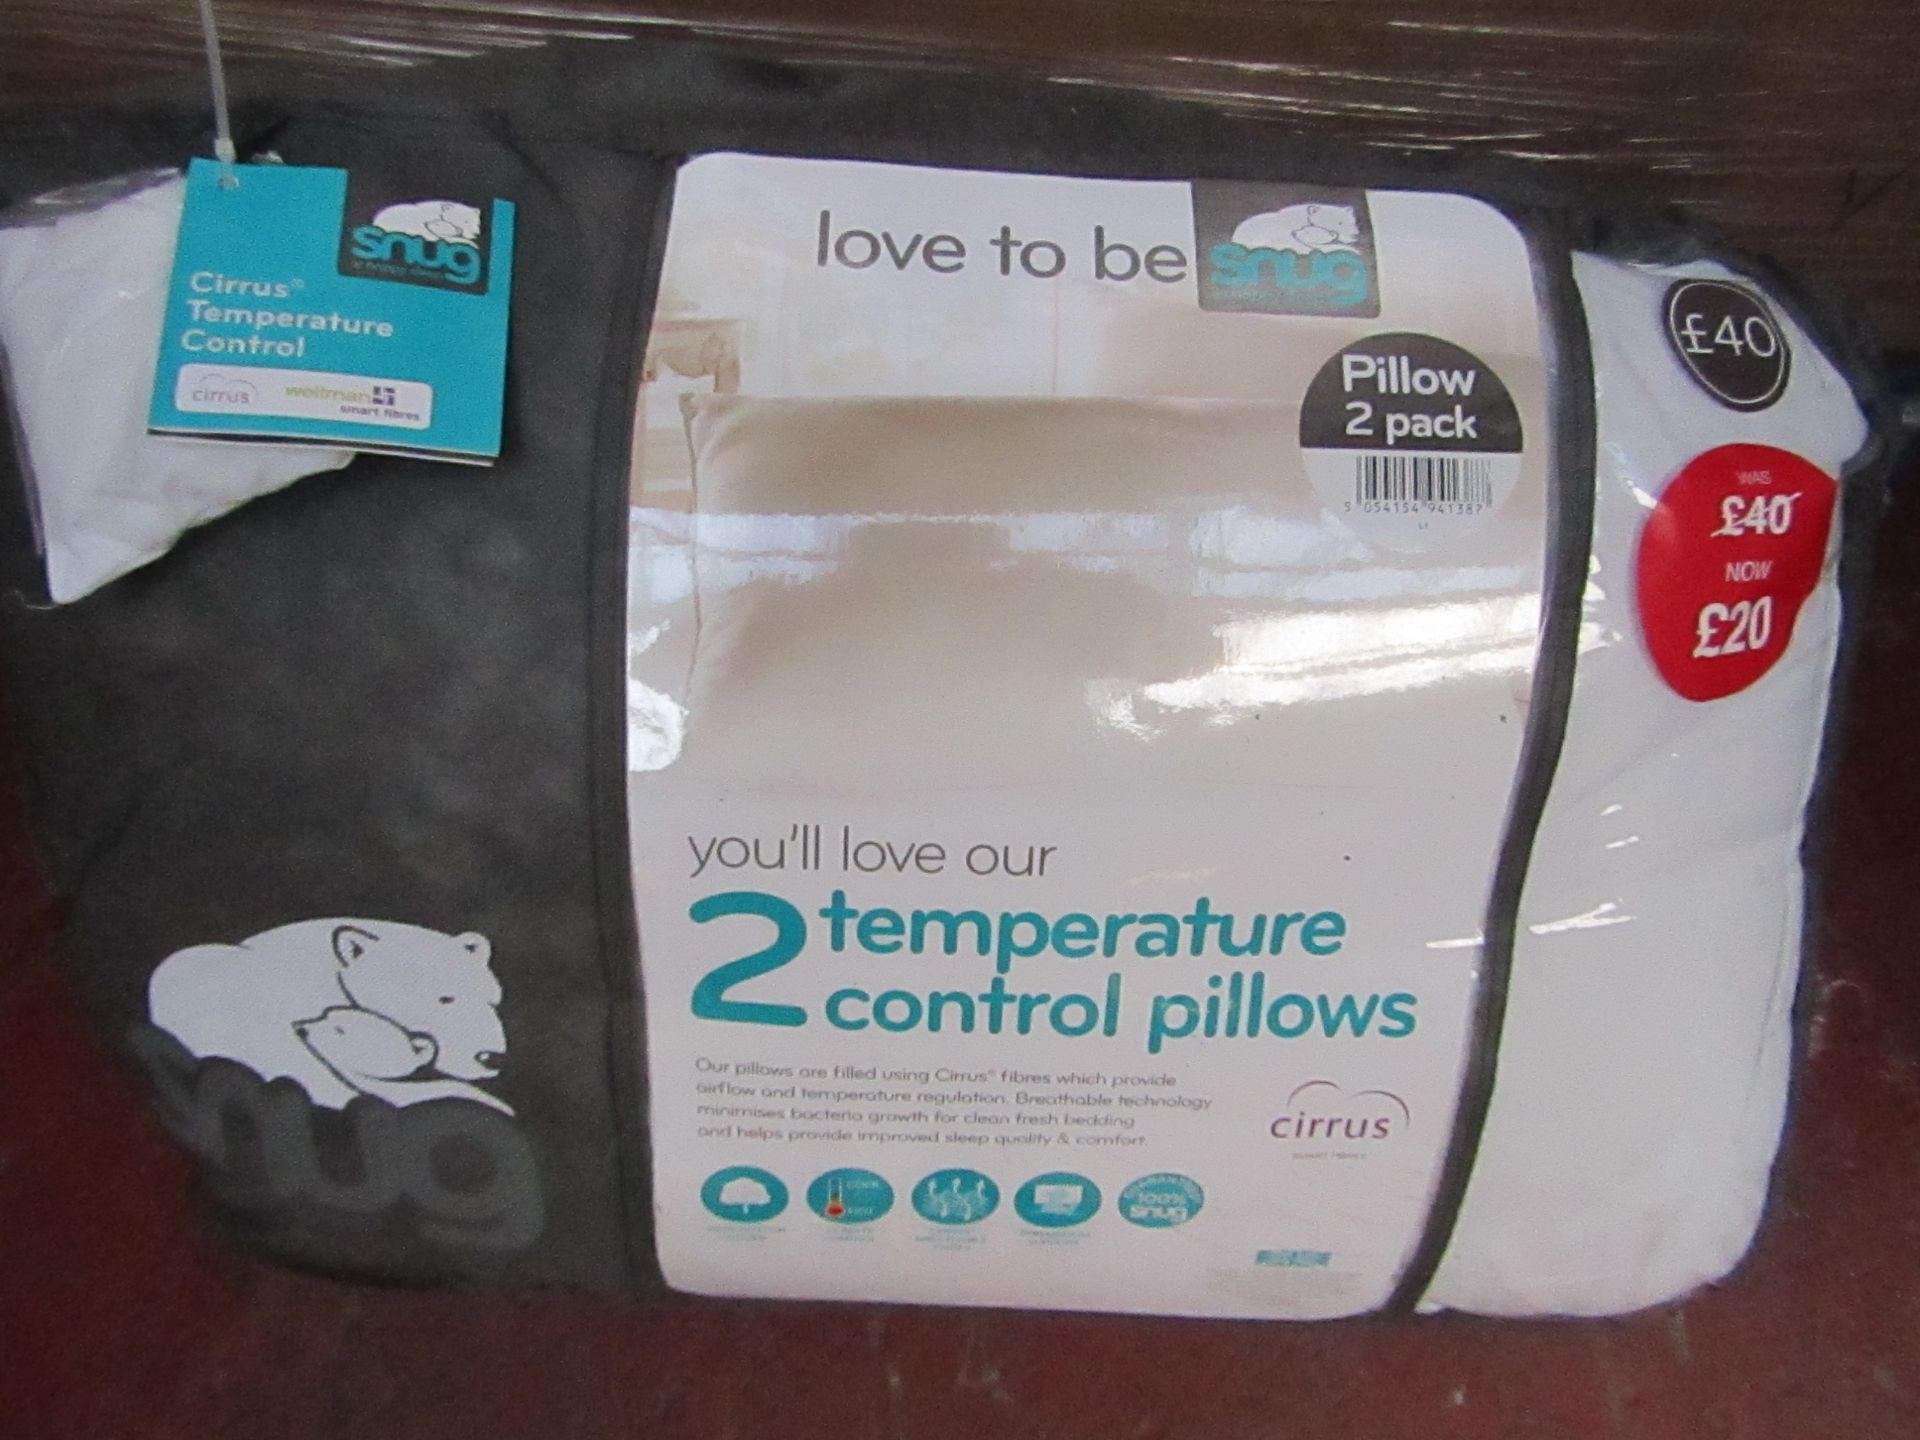 Snug pack of 2 temperature control pillows, brand new and packaged, RRP £40